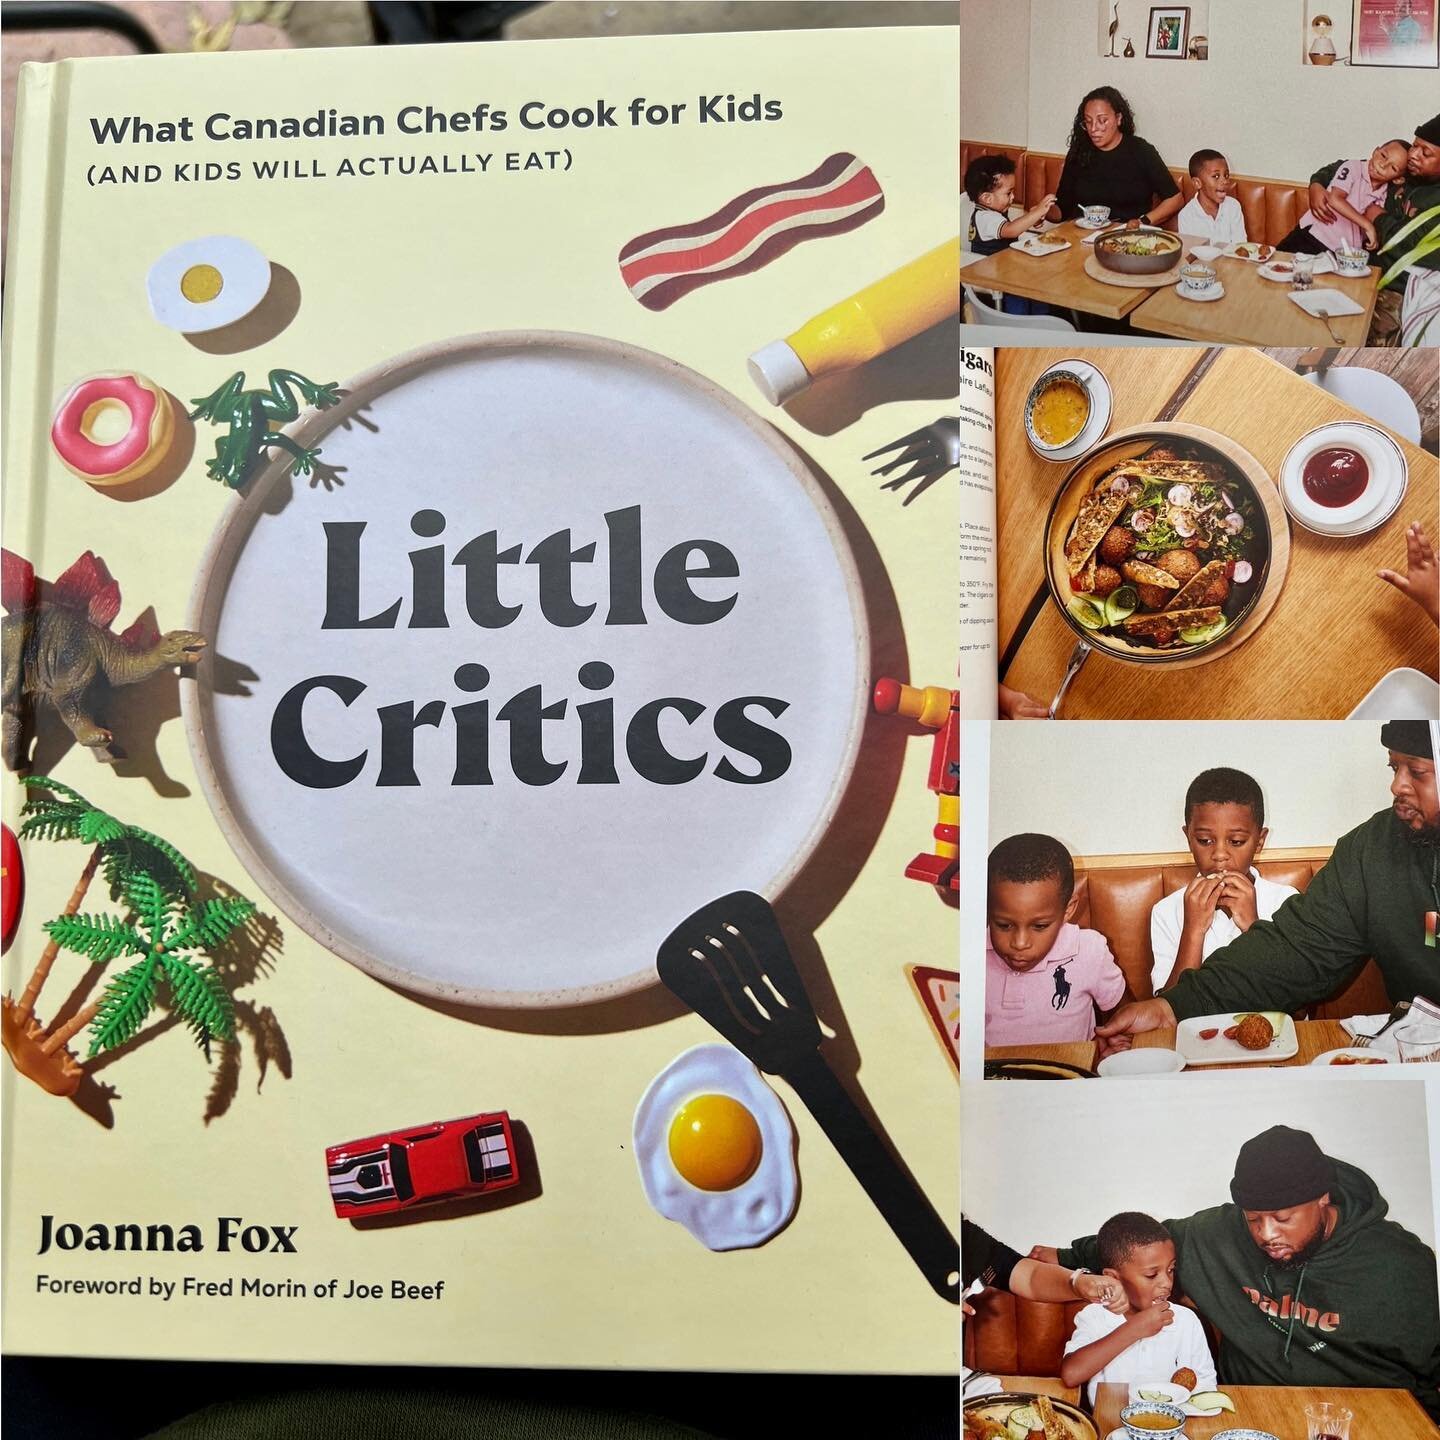 We are so happy to have been included in the cook book #LittleCritics by @joannafox. This proves that even the best chef can be brought down by kids critical opinions. Lol @appetite_randomhouse